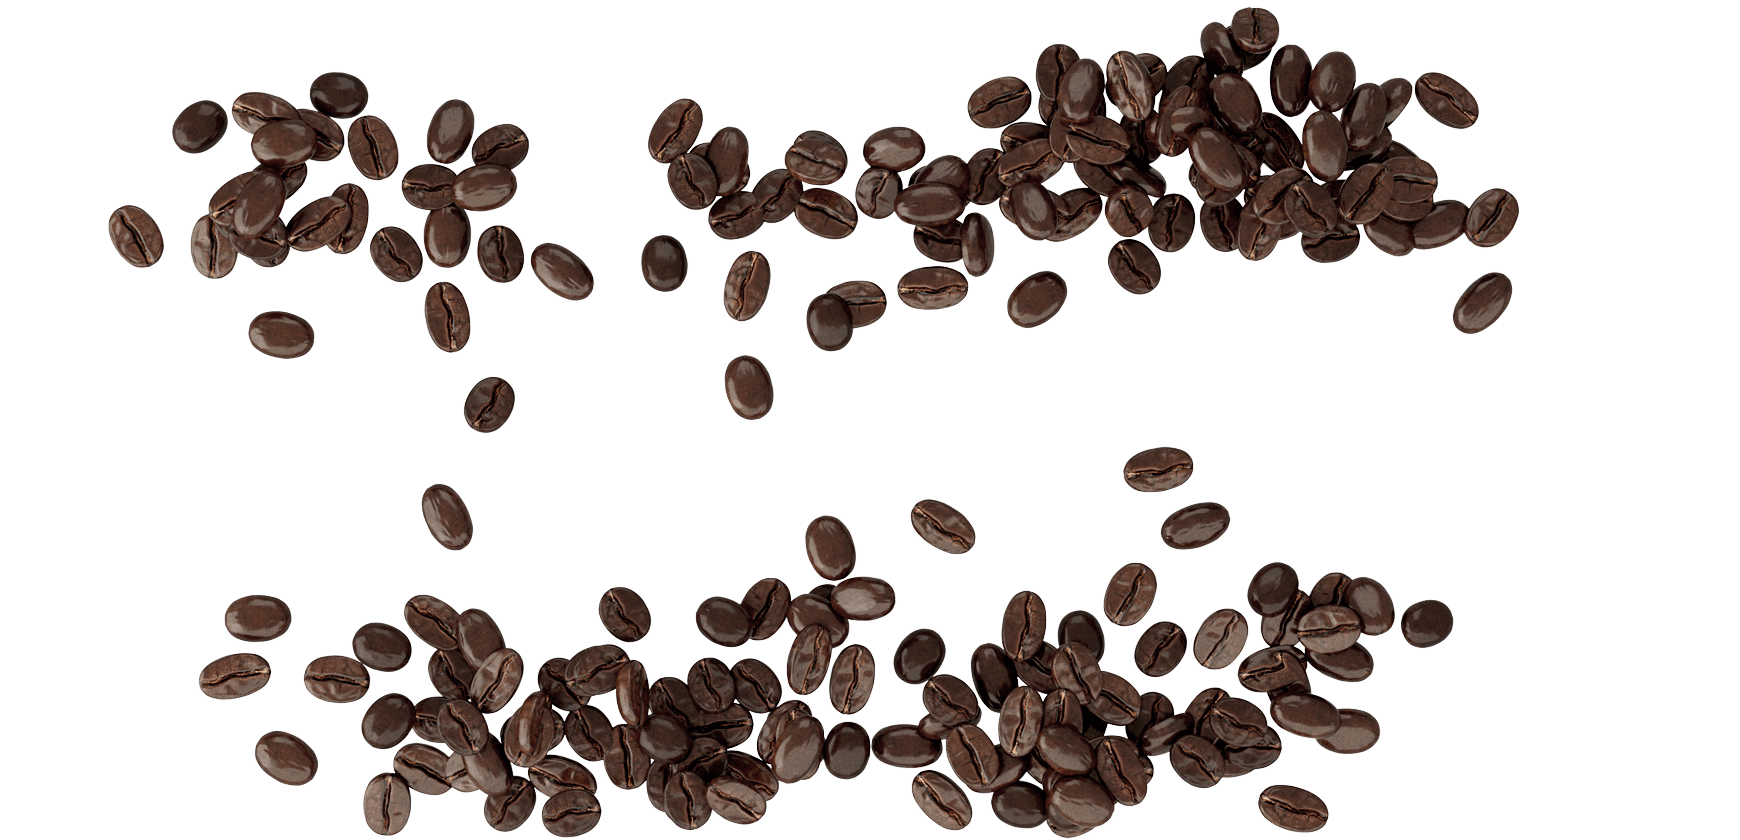 Scattered dark coffee beans